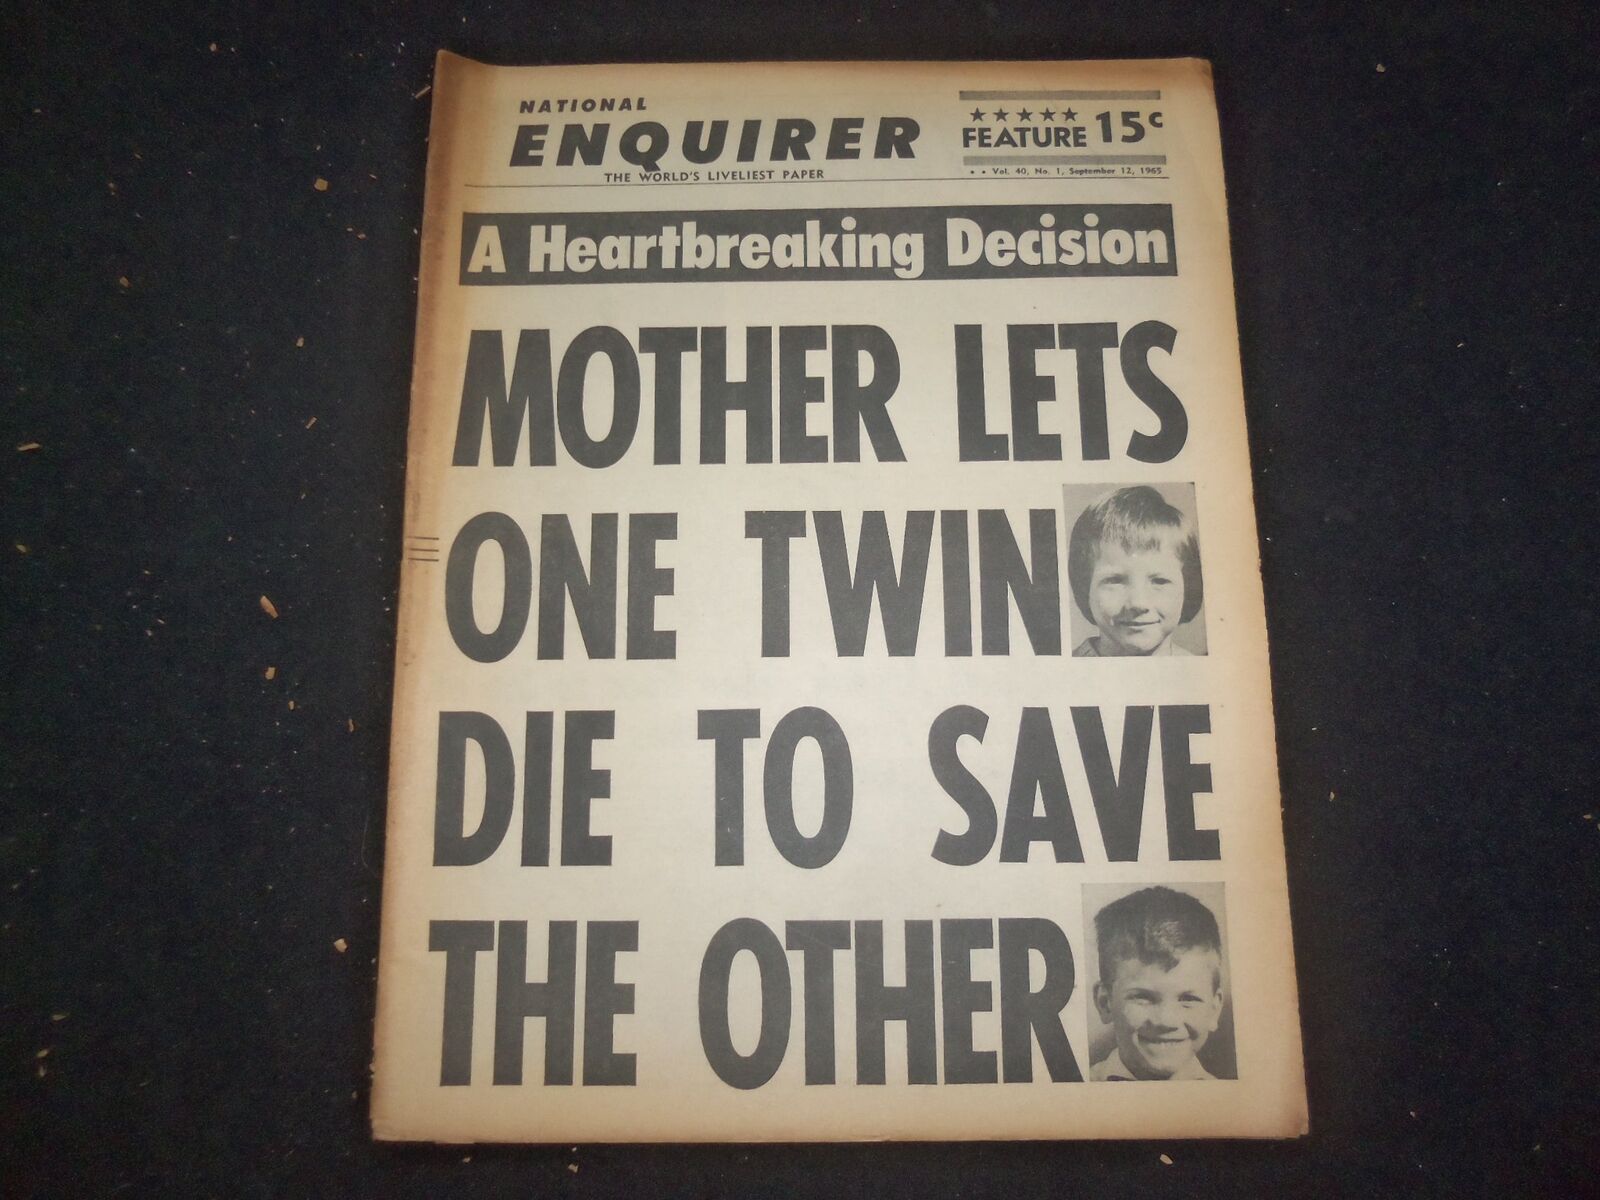 1965 SEP 12 NATIONAL ENQUIRER NEWSPAPER-MOTHER LETS TWIN DIE SAVE OTHER- NP 7393